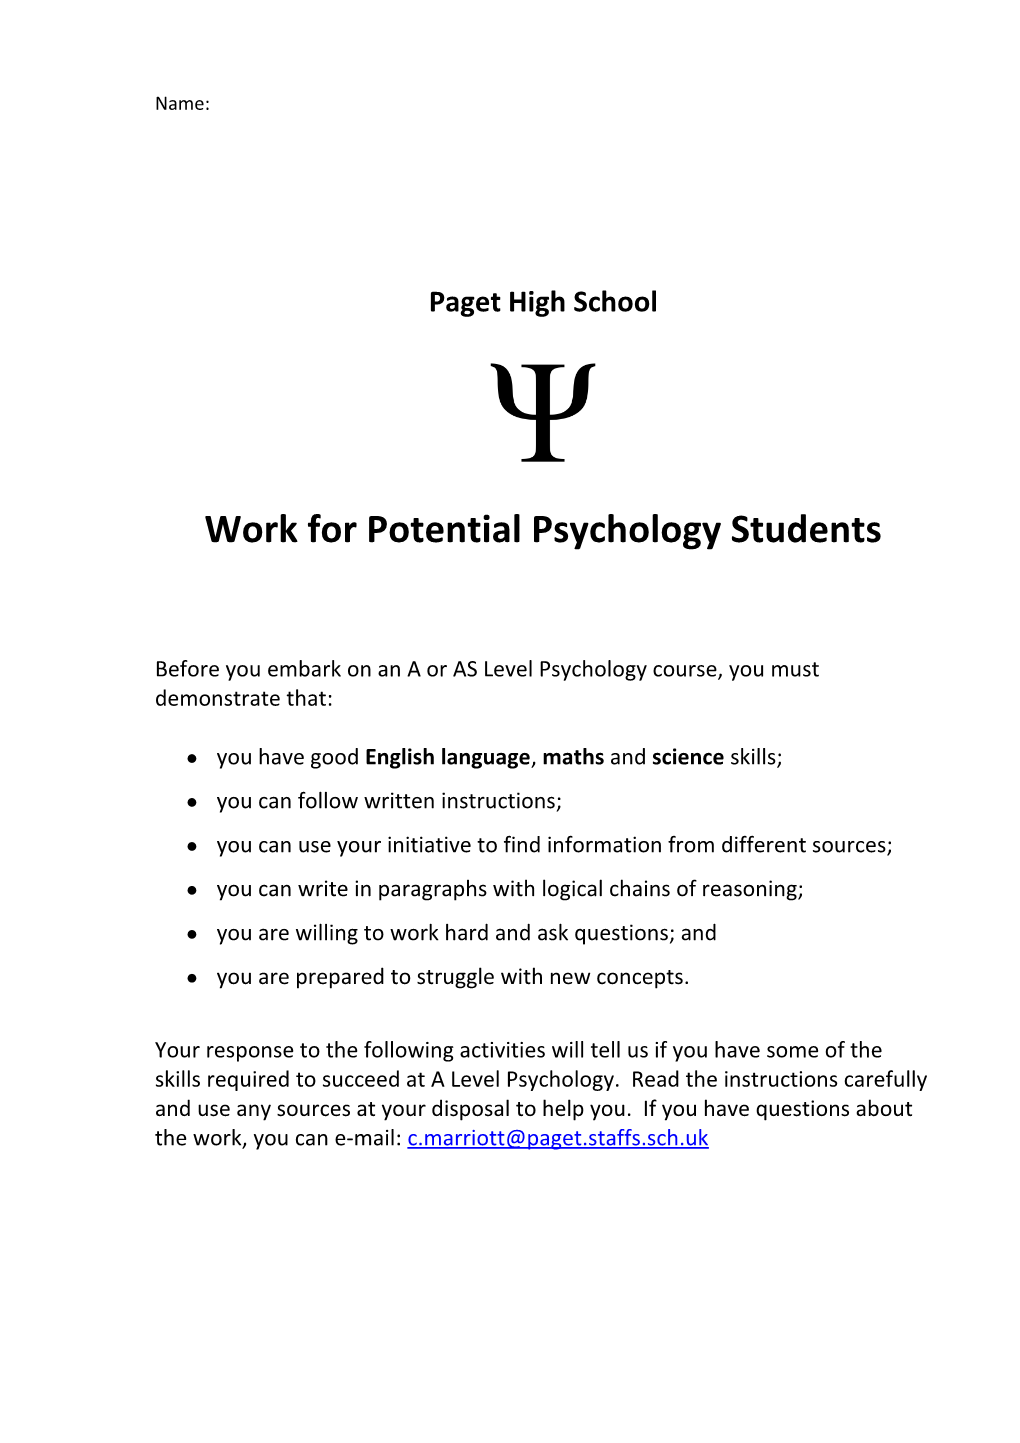 Work for Potential Psychology Students